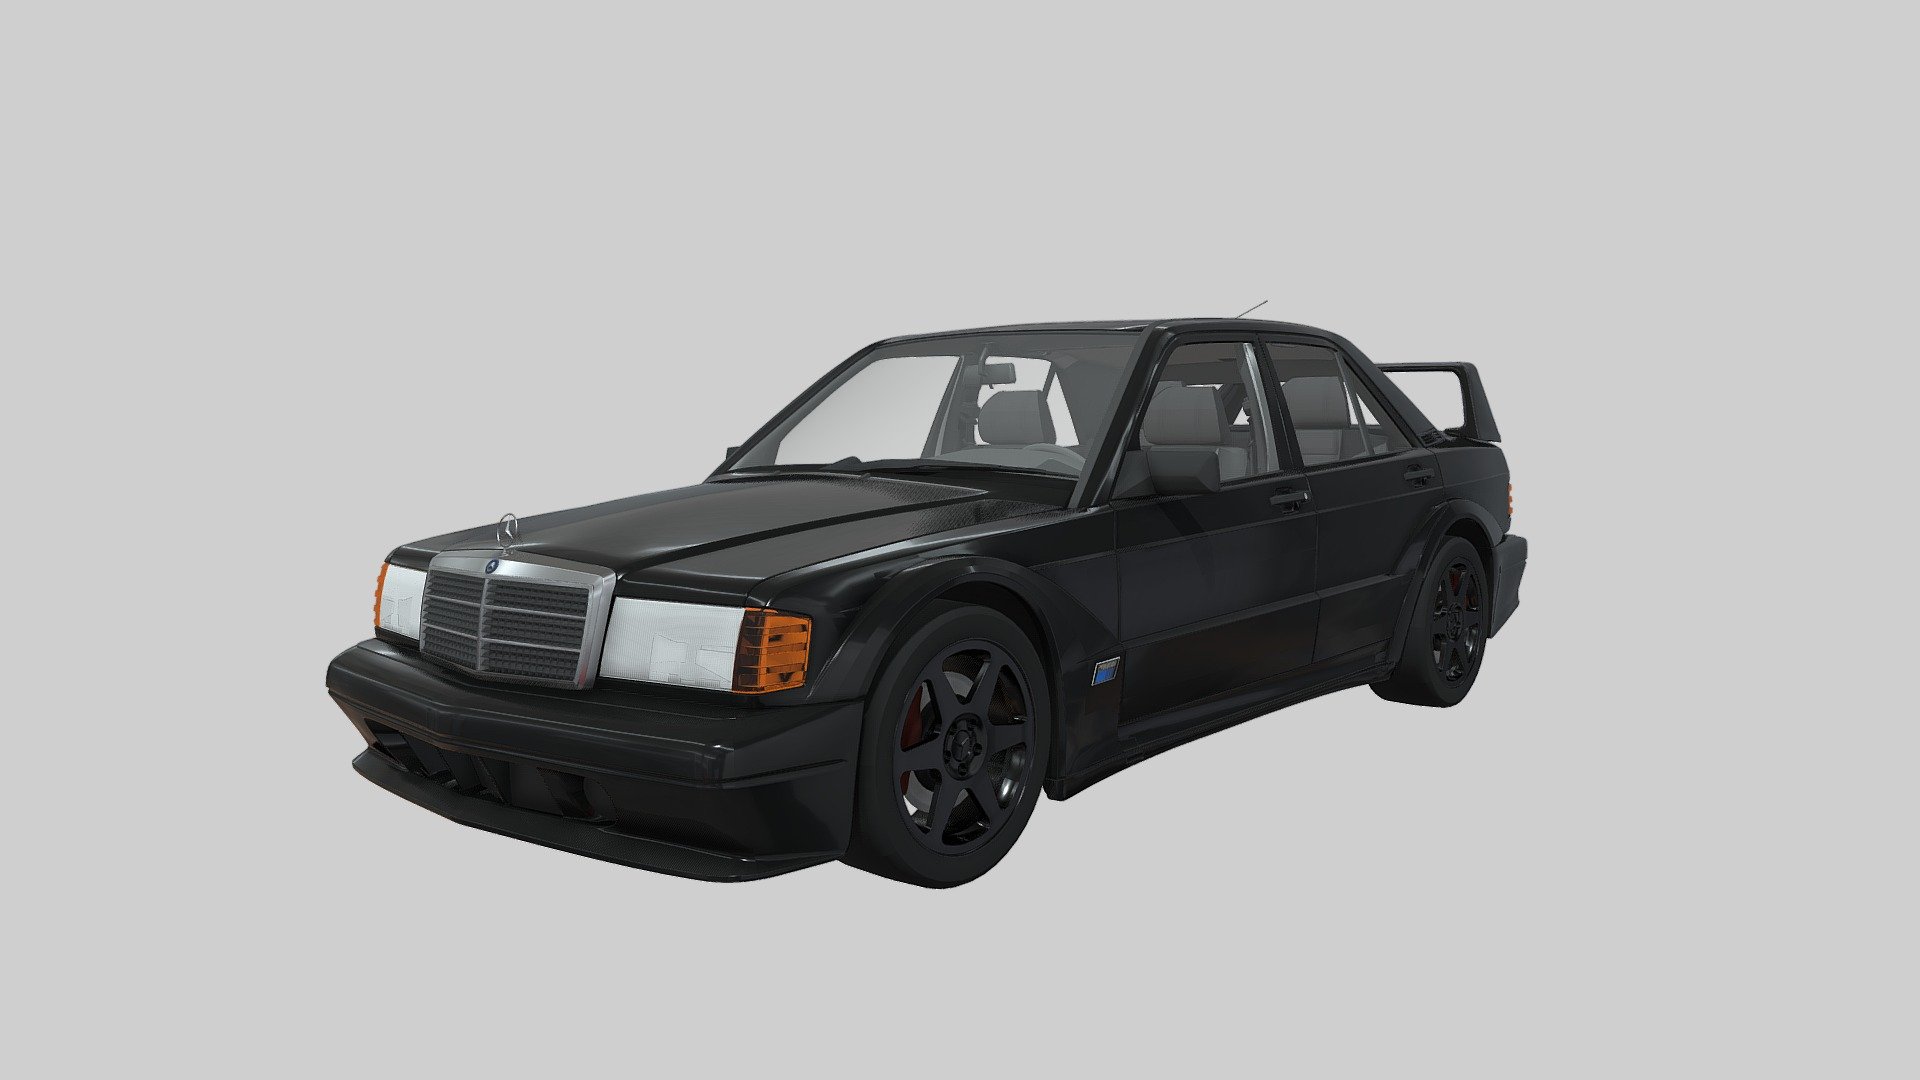 Blender Rig + PBR Material . Mercedes 190E EVO 1982-1993 3D Model Free , PBR Material

If you like this model I would appreciate if you rate it.
Also check out my other models, just click on my user name to see complete gallery 3d model